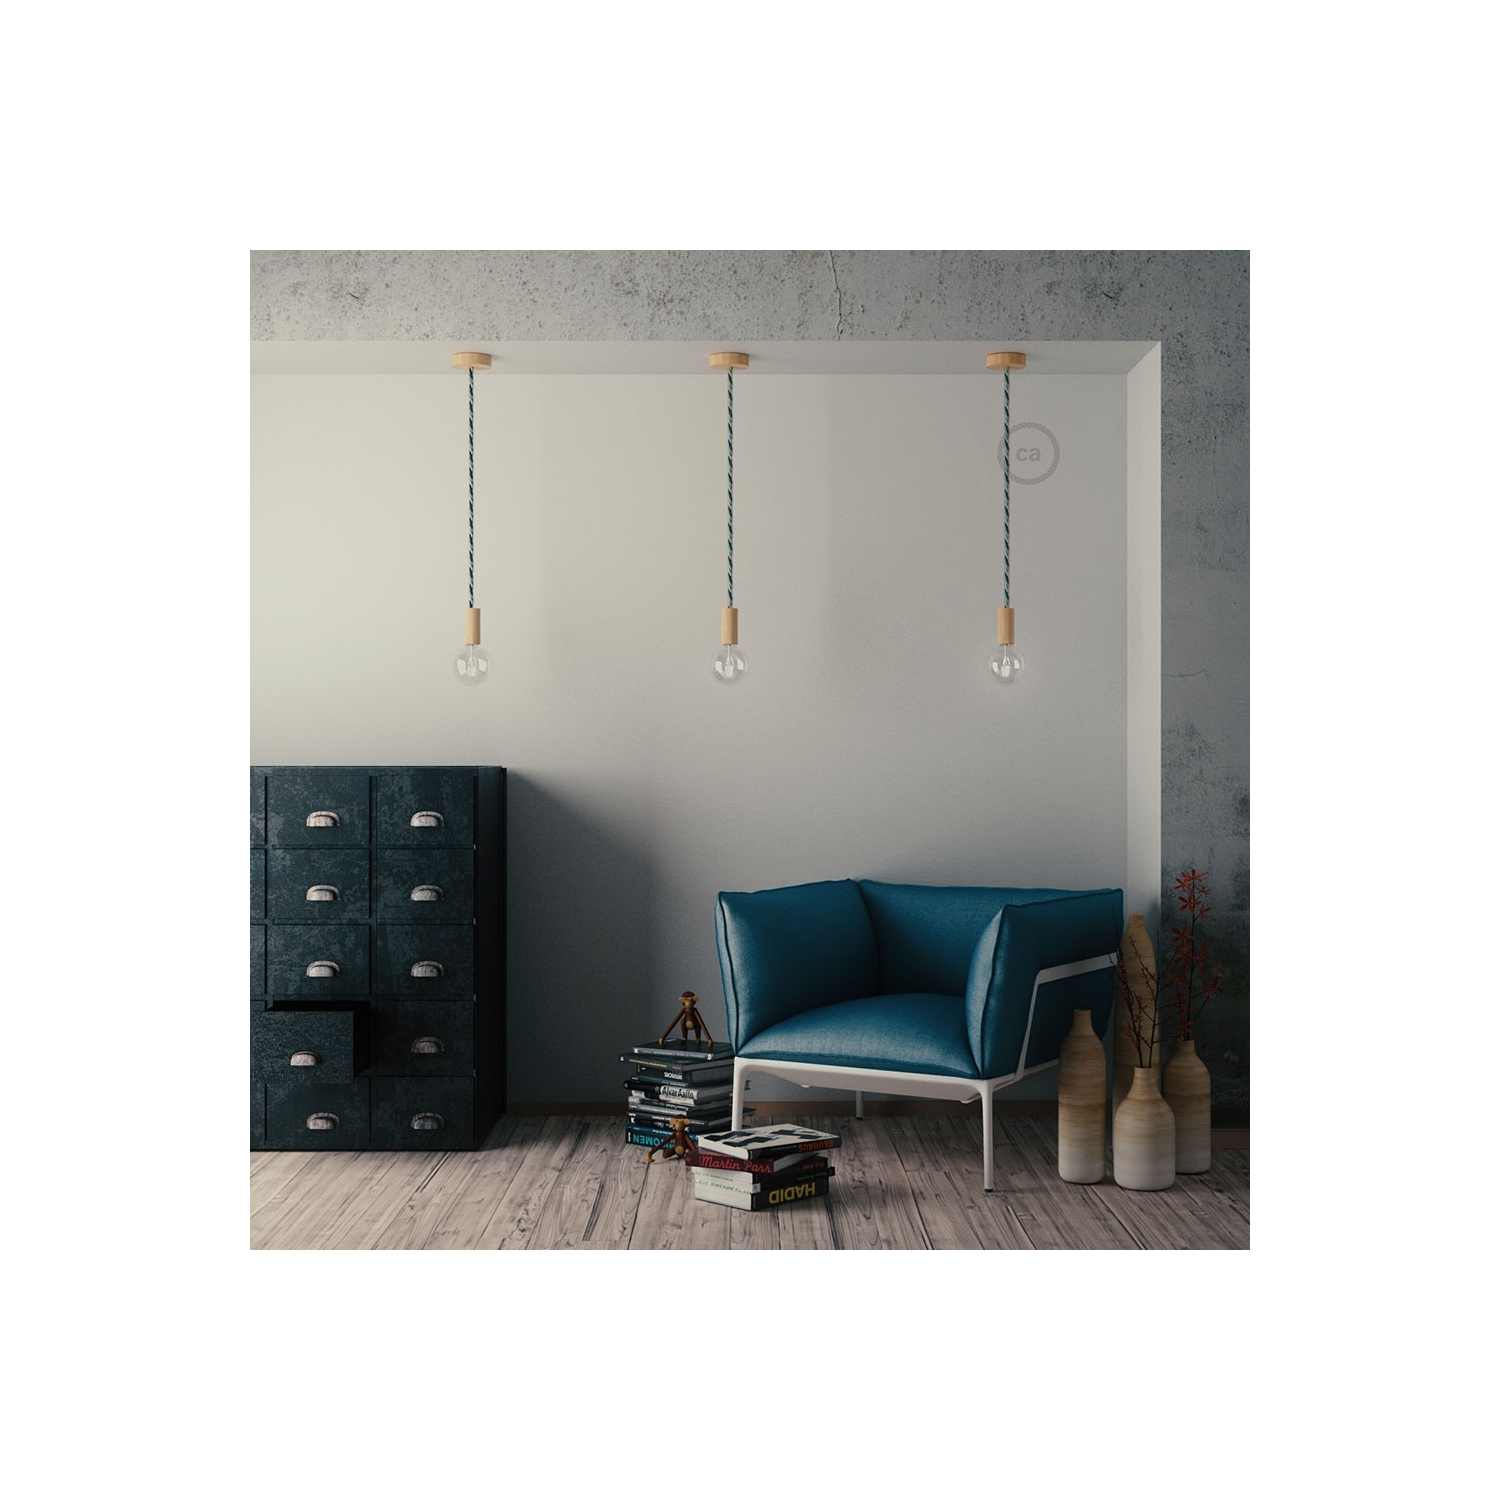 Wooden Pendant, suspended lamp with nautical XL 16mm rope in bright fabric Bernadotte, Made in Italy